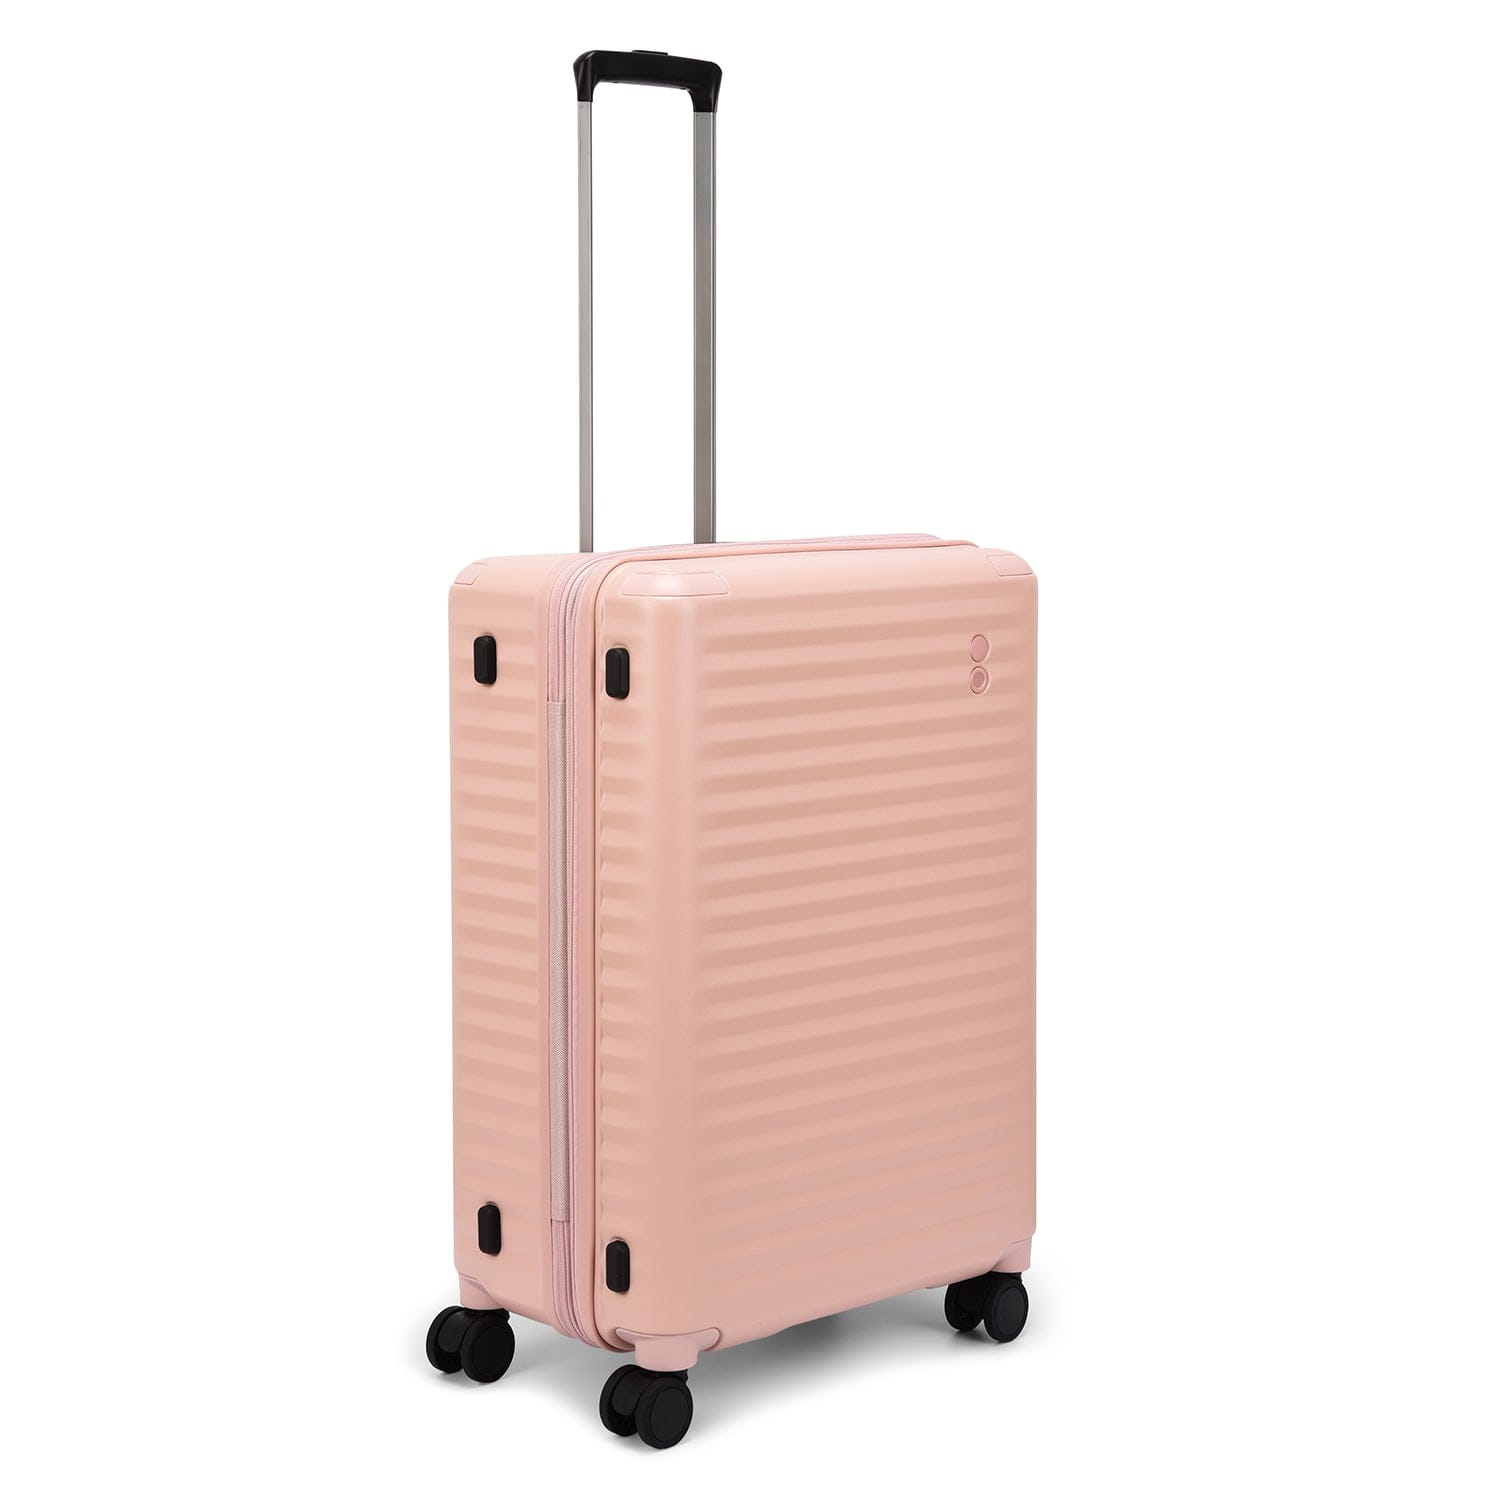 Echolac Celestra 66.5cm Hardcase Expandable 4 Double Wheel Check-In Luggage Trolley Pink - PC183XA PINK 24